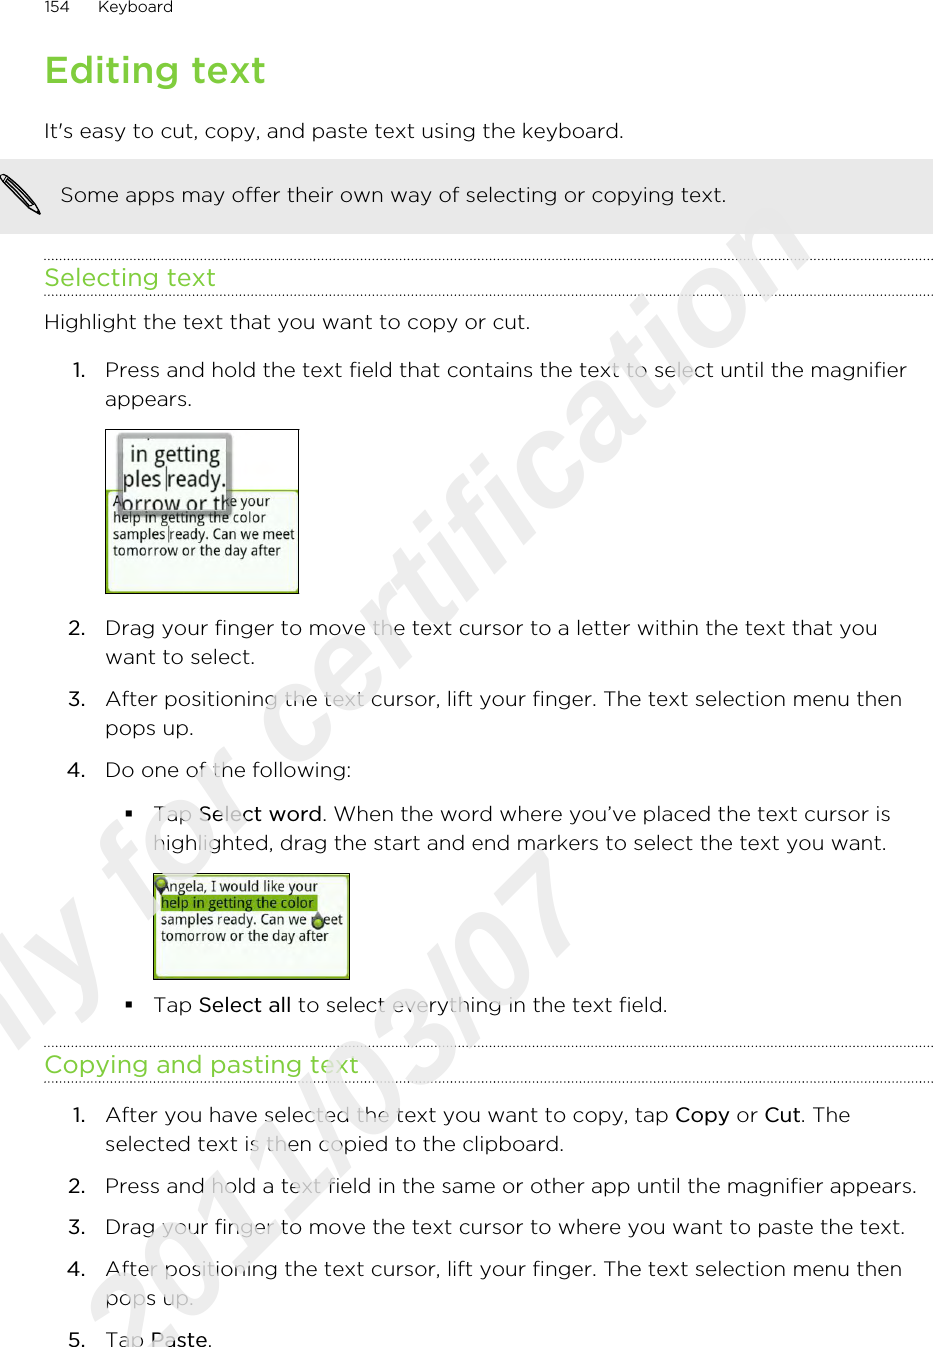 Editing textIt&apos;s easy to cut, copy, and paste text using the keyboard.Some apps may offer their own way of selecting or copying text.Selecting textHighlight the text that you want to copy or cut.1. Press and hold the text field that contains the text to select until the magnifierappears. 2. Drag your finger to move the text cursor to a letter within the text that youwant to select.3. After positioning the text cursor, lift your finger. The text selection menu thenpops up.4. Do one of the following:§Tap Select word. When the word where you’ve placed the text cursor ishighlighted, drag the start and end markers to select the text you want.§Tap Select all to select everything in the text field.Copying and pasting text1. After you have selected the text you want to copy, tap Copy or Cut. Theselected text is then copied to the clipboard.2. Press and hold a text field in the same or other app until the magnifier appears.3. Drag your finger to move the text cursor to where you want to paste the text.4. After positioning the text cursor, lift your finger. The text selection menu thenpops up.5. Tap Paste.154 KeyboardOnly for certification  2011/03/07